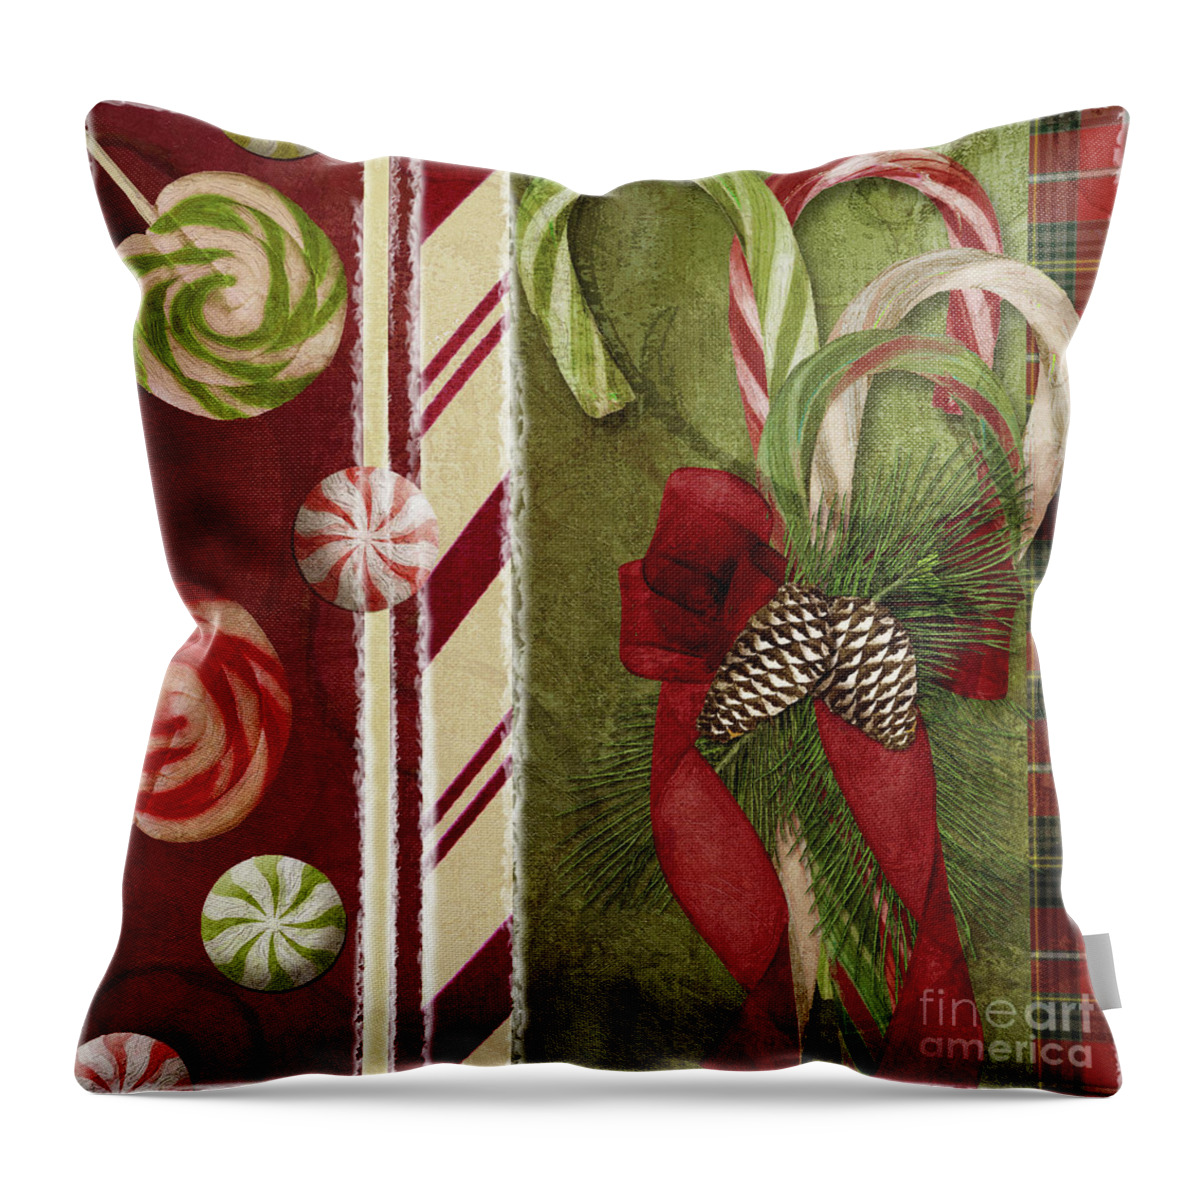 Christmas Throw Pillow featuring the painting Sweet Holiday I by Mindy Sommers